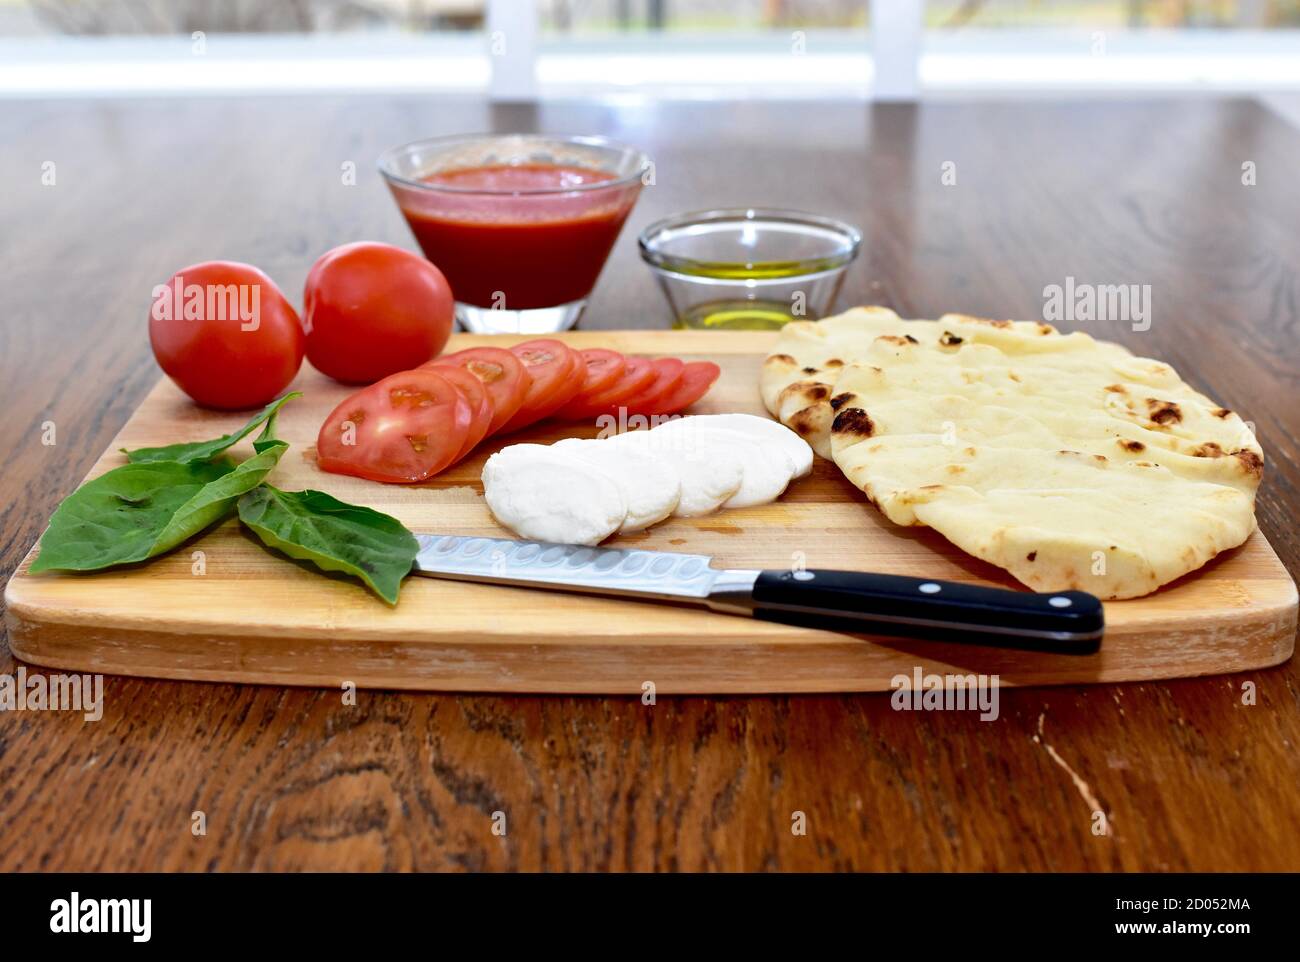 Fresh organic wholesome simple meal kit ingredients ready to prepare delicious Italian meals to share with friends and family Stock Photo